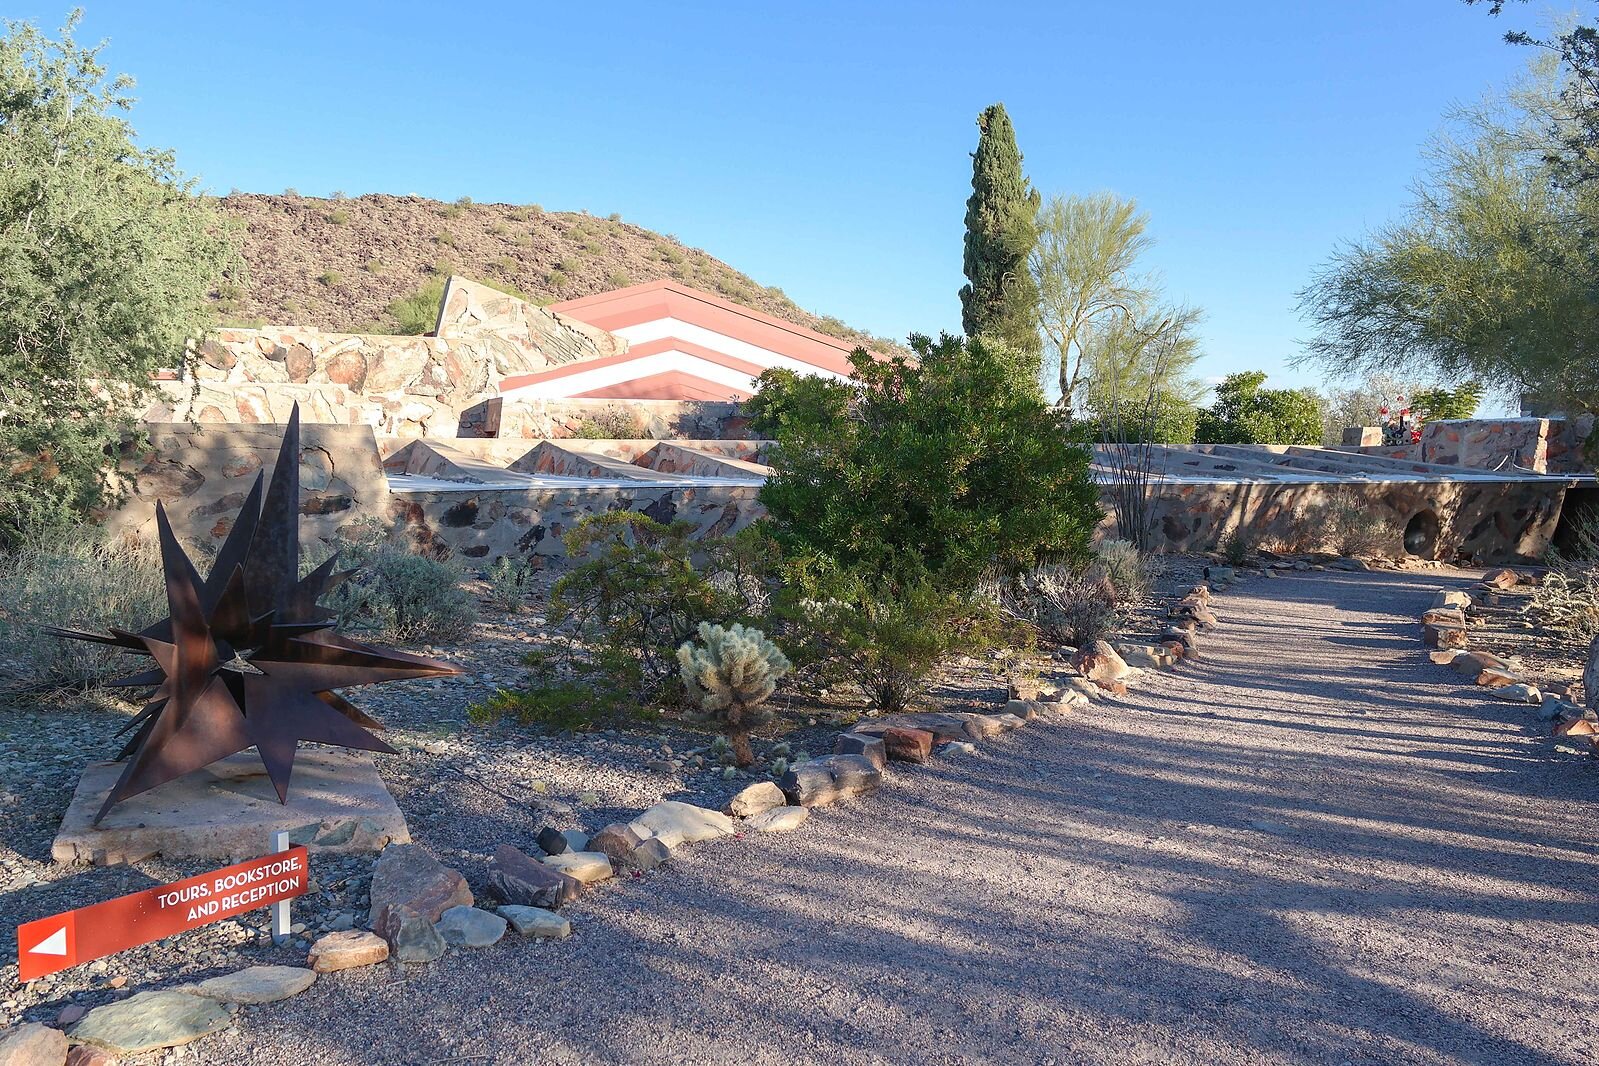  Here is Wright’s home, Taliesin West, set in the desert mountains. 